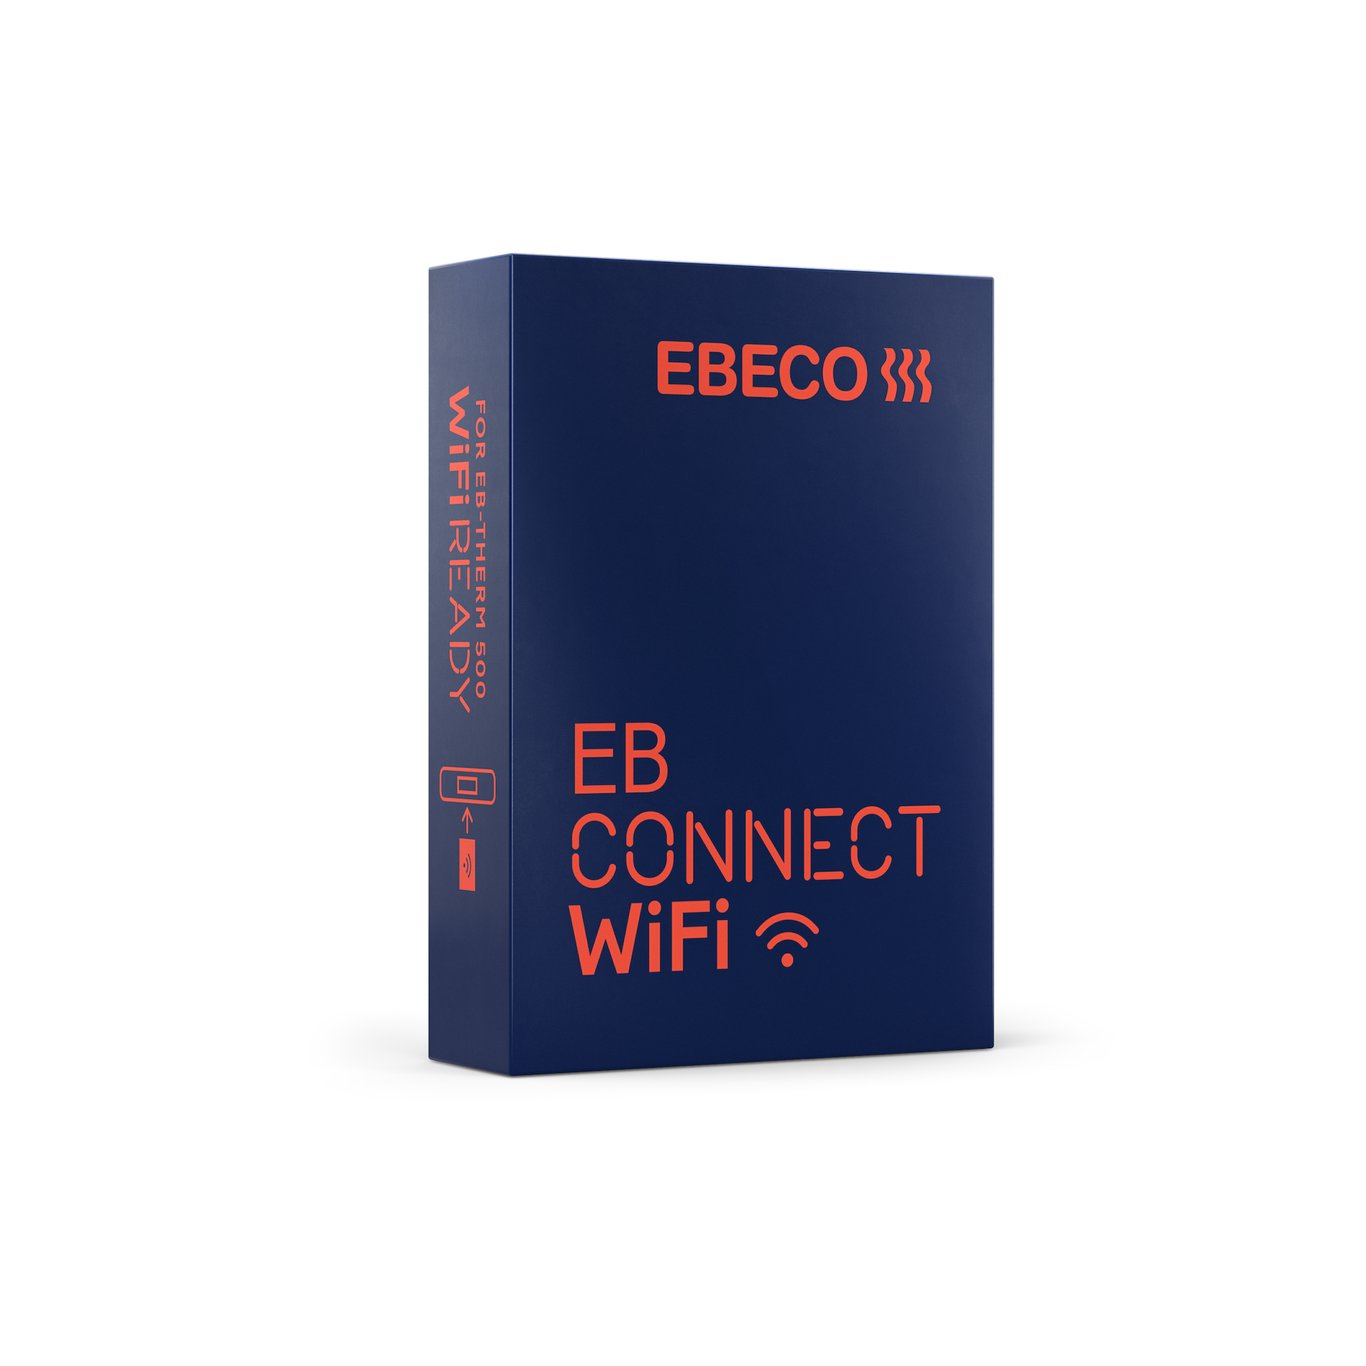 EBECO CONNECT WIFI